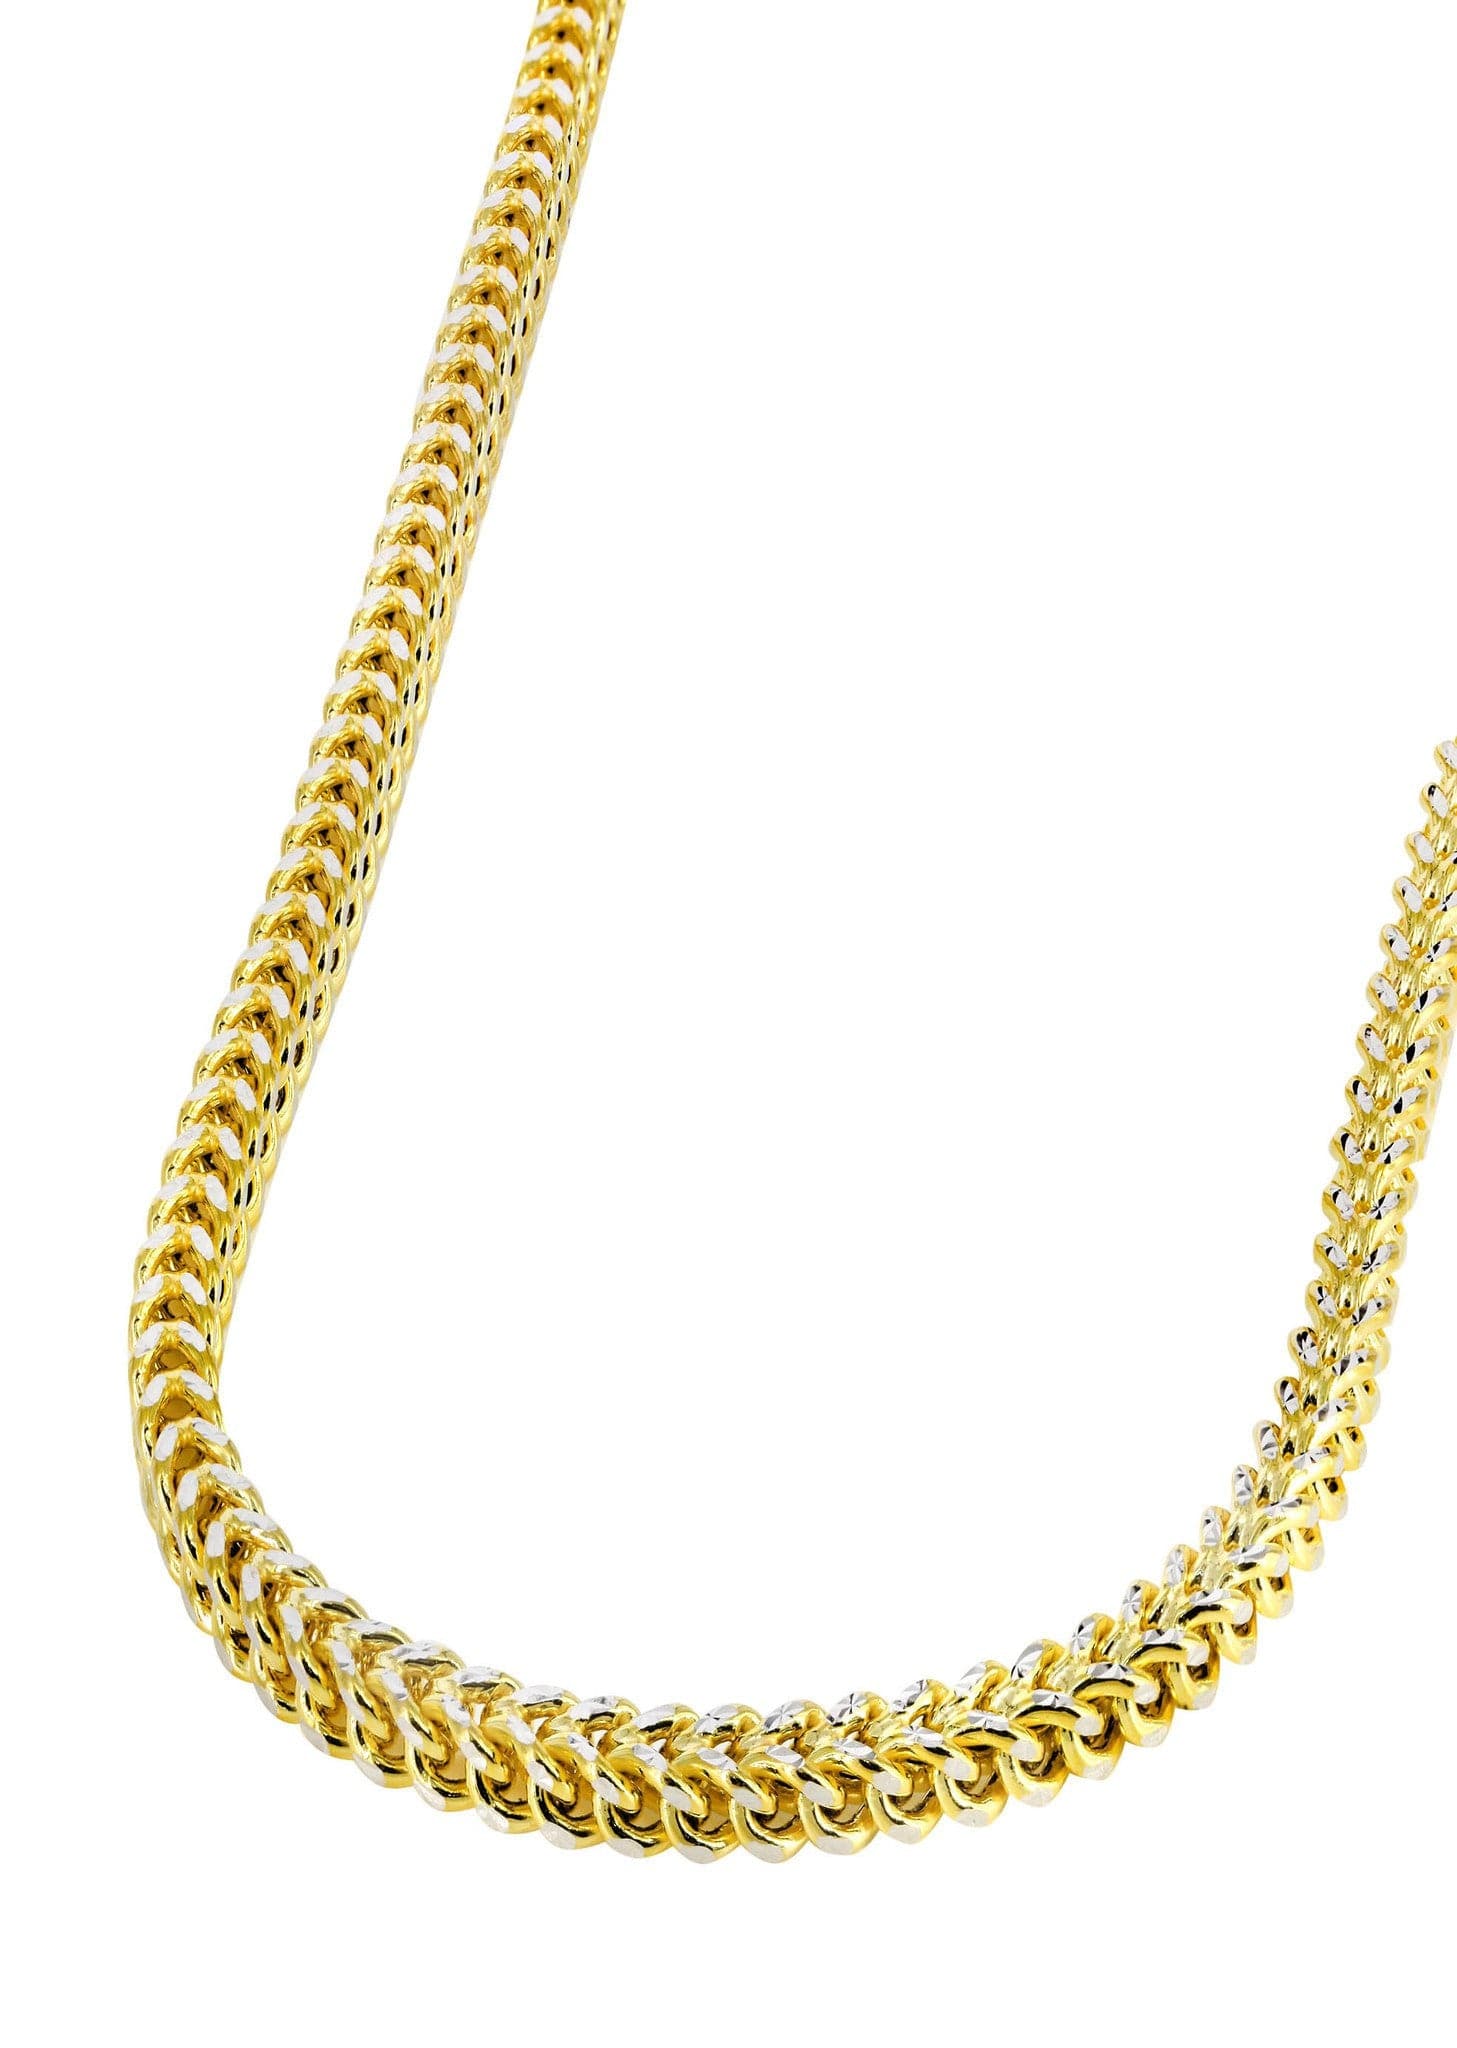 Gold Franco Chain 4mm - Gold Presidents